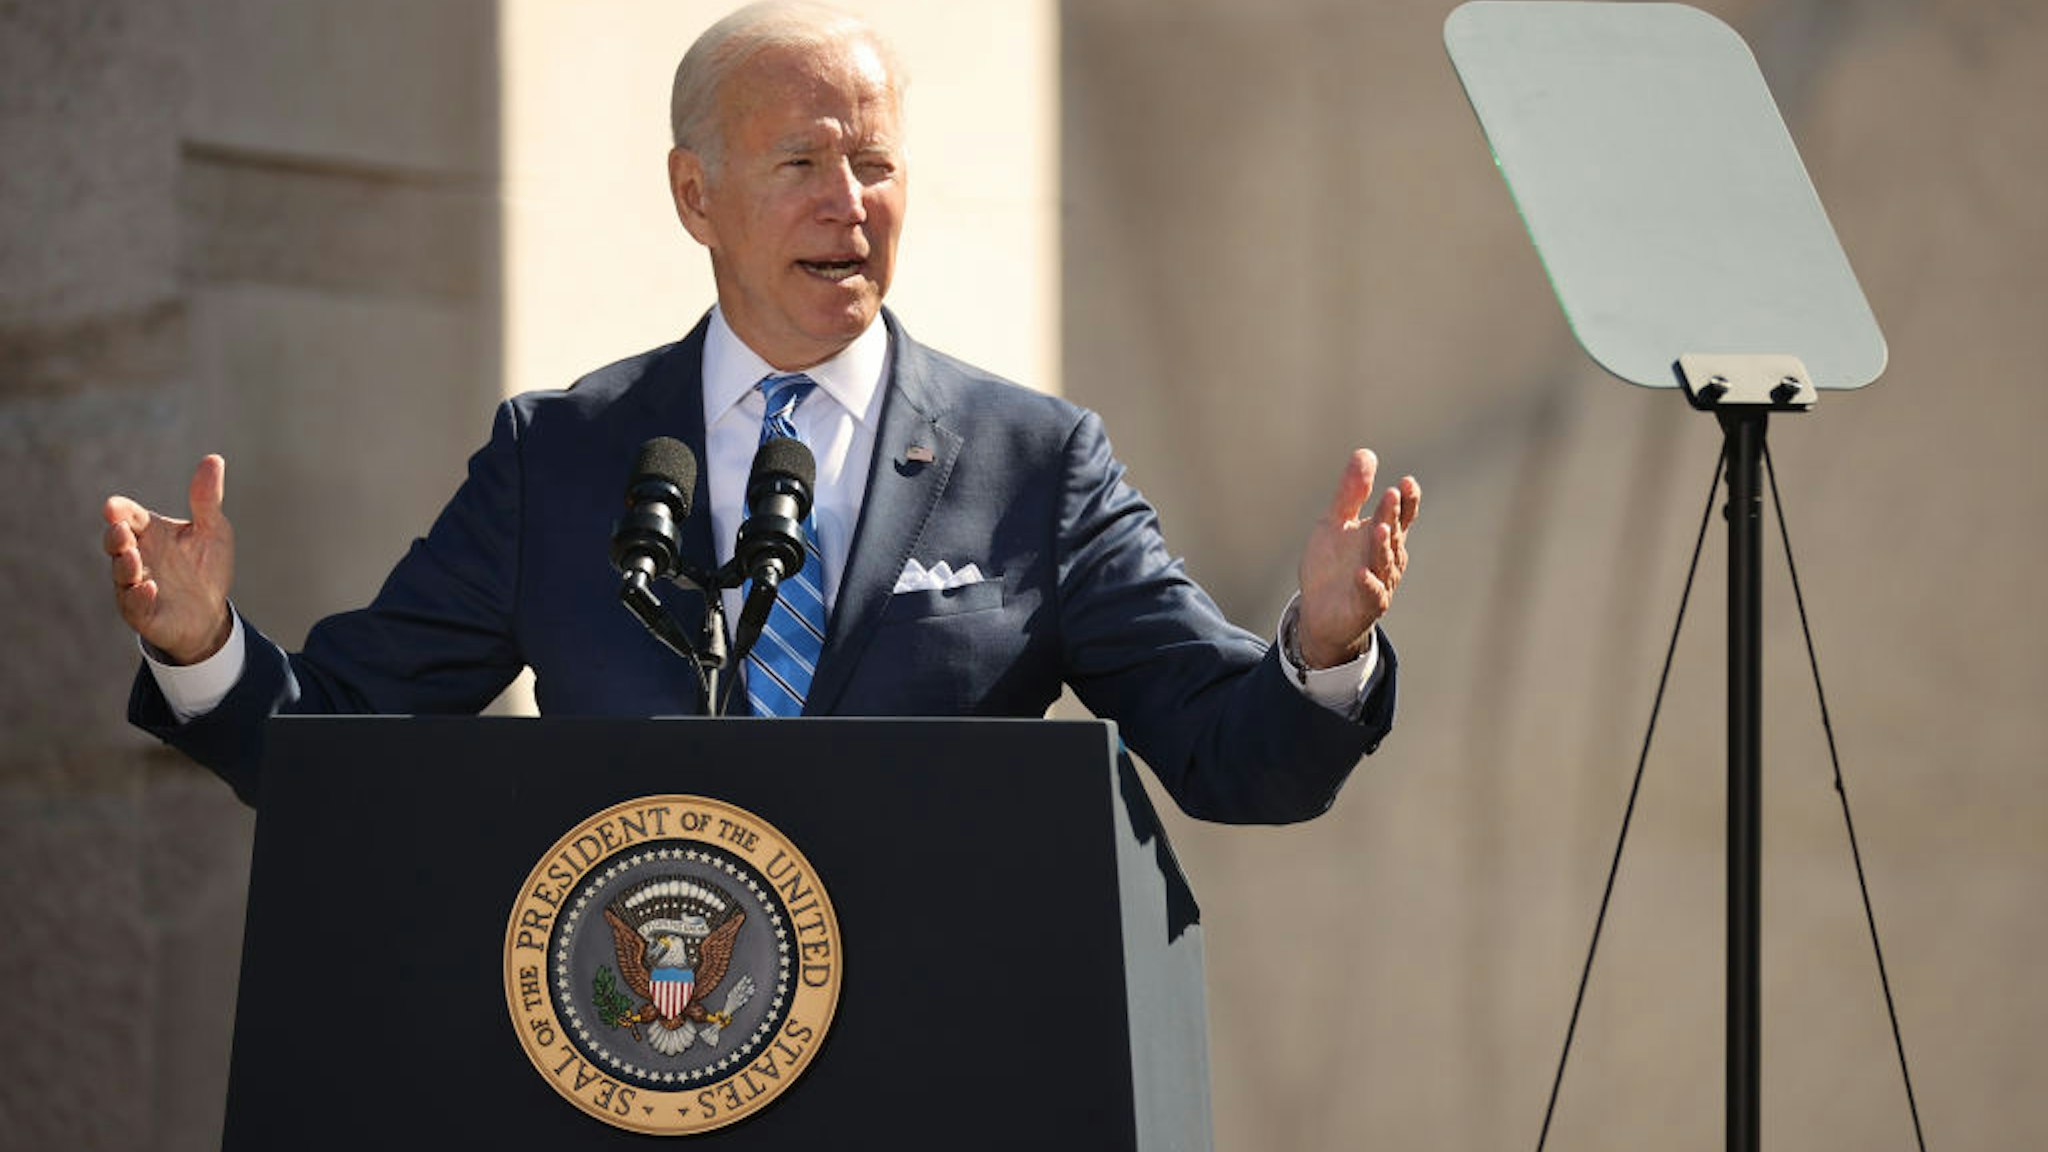 U.S. President Joe Biden delivers remarks during the 10th-anniversary celebration of the Martin Luther King, Jr. Memorial near the Tidal Basin on the National Mall on October 21, 2021 in Washington, DC.